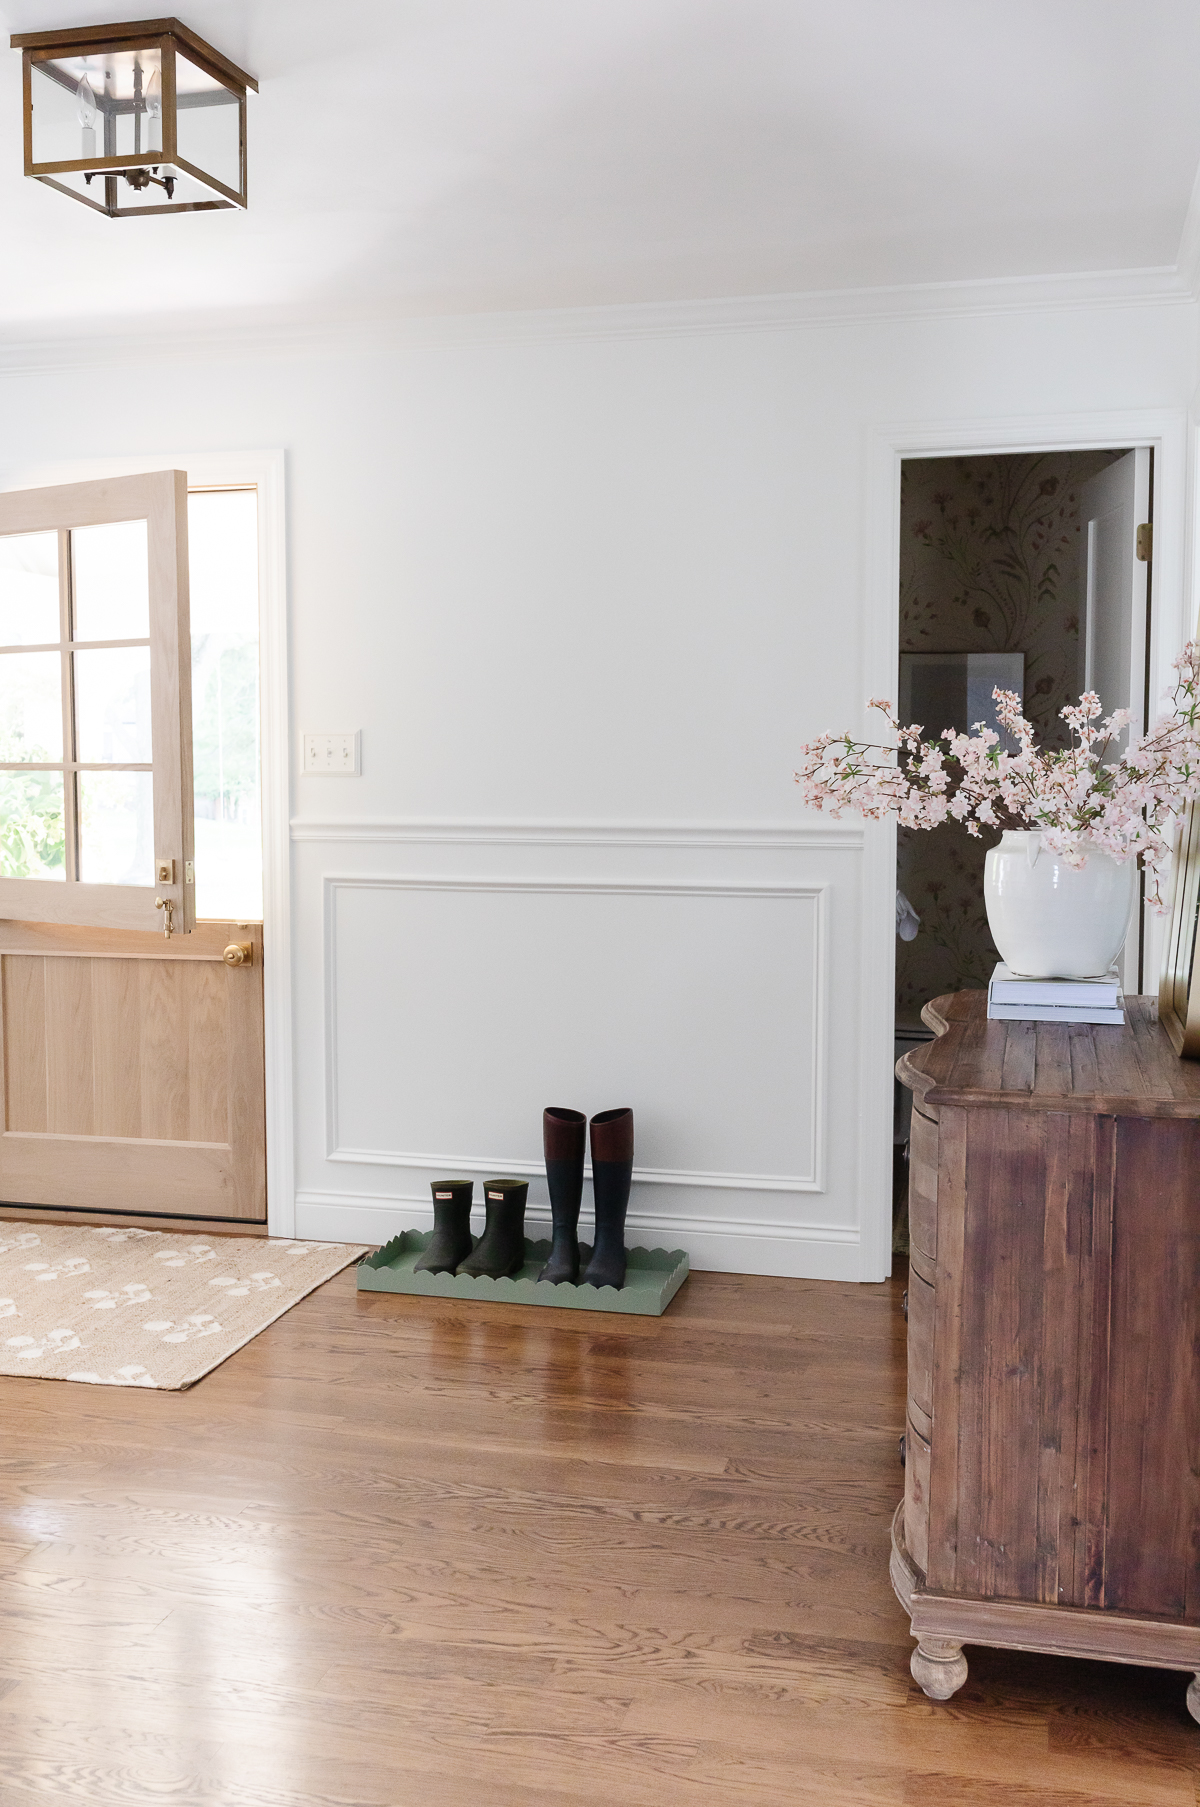 A living room with hardwood floors and a door featuring a curved dresser.